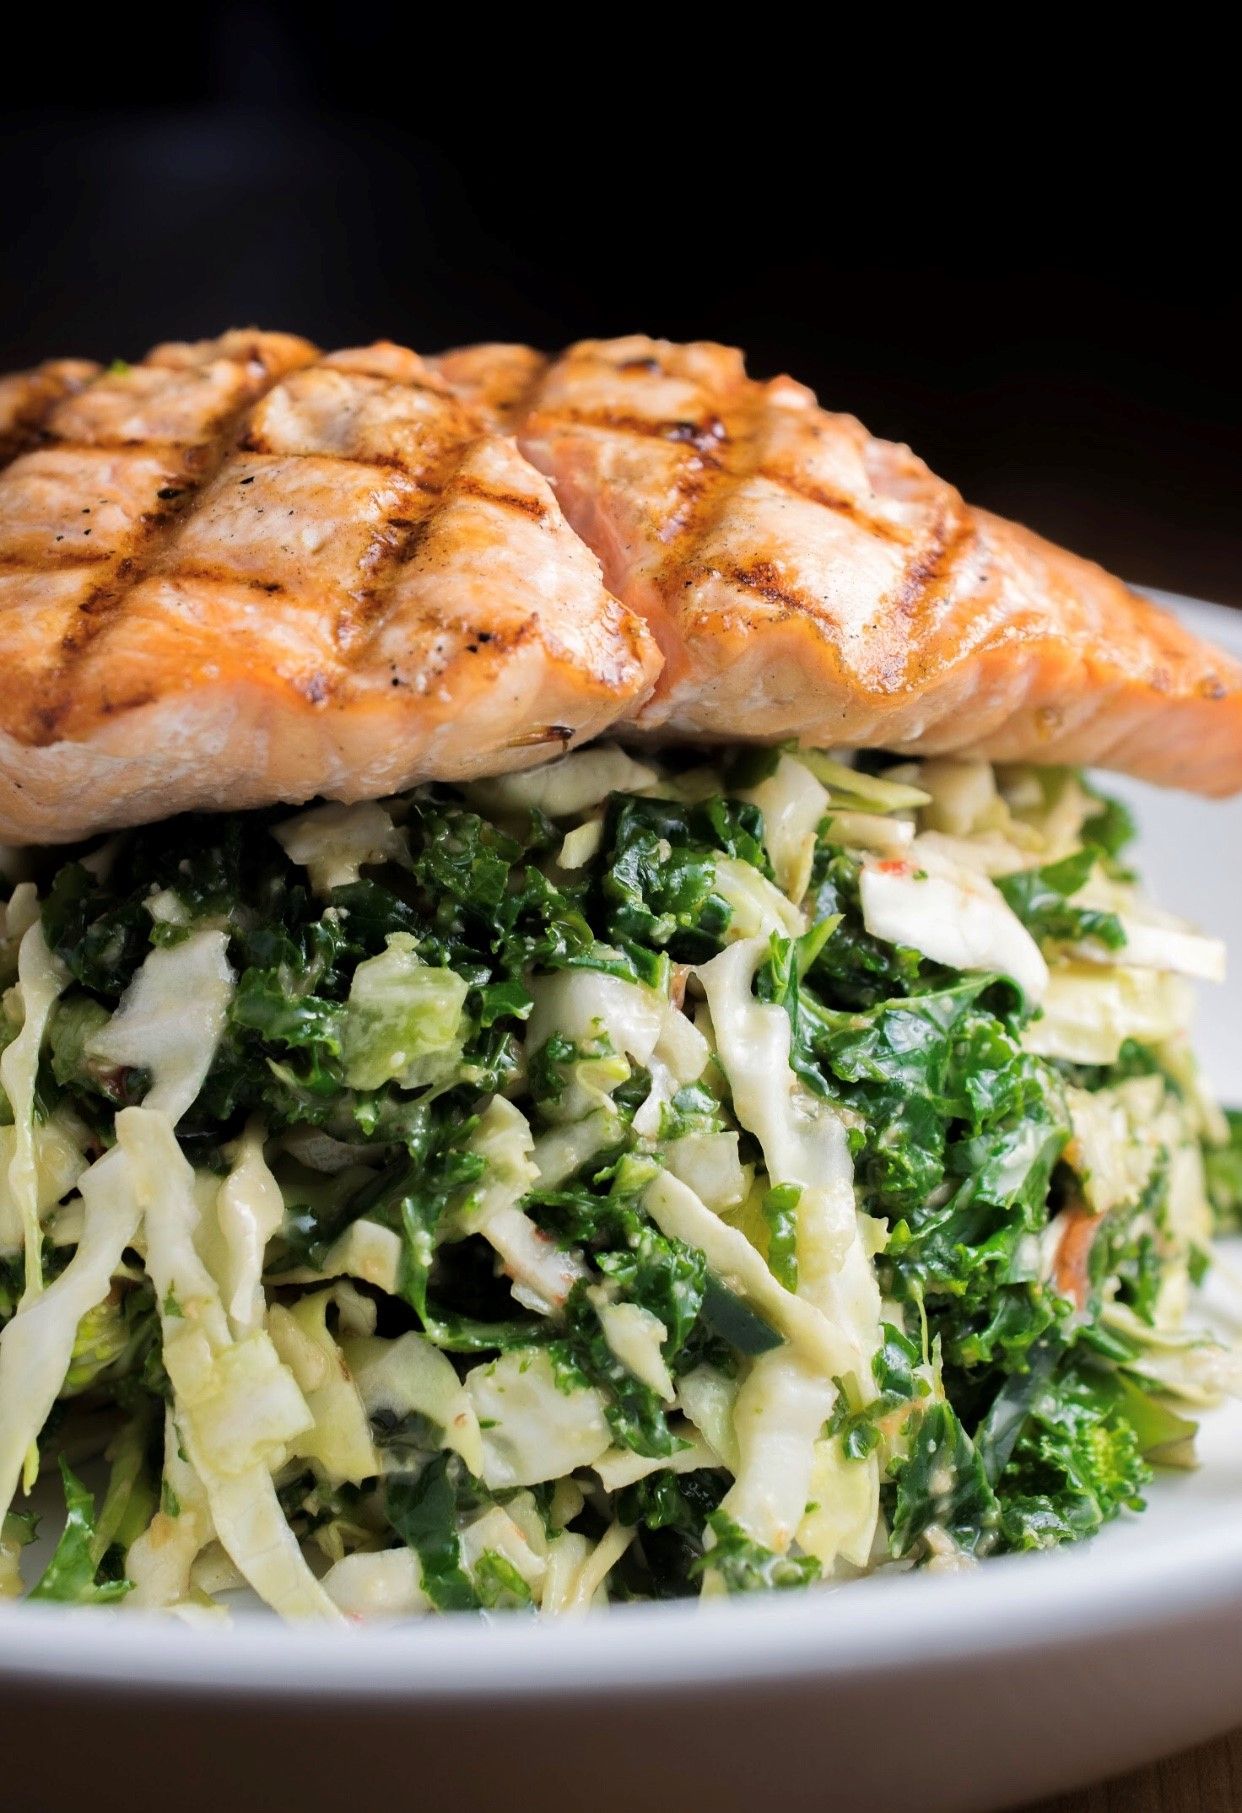 Grilled salmon on a heaping bed of salad.